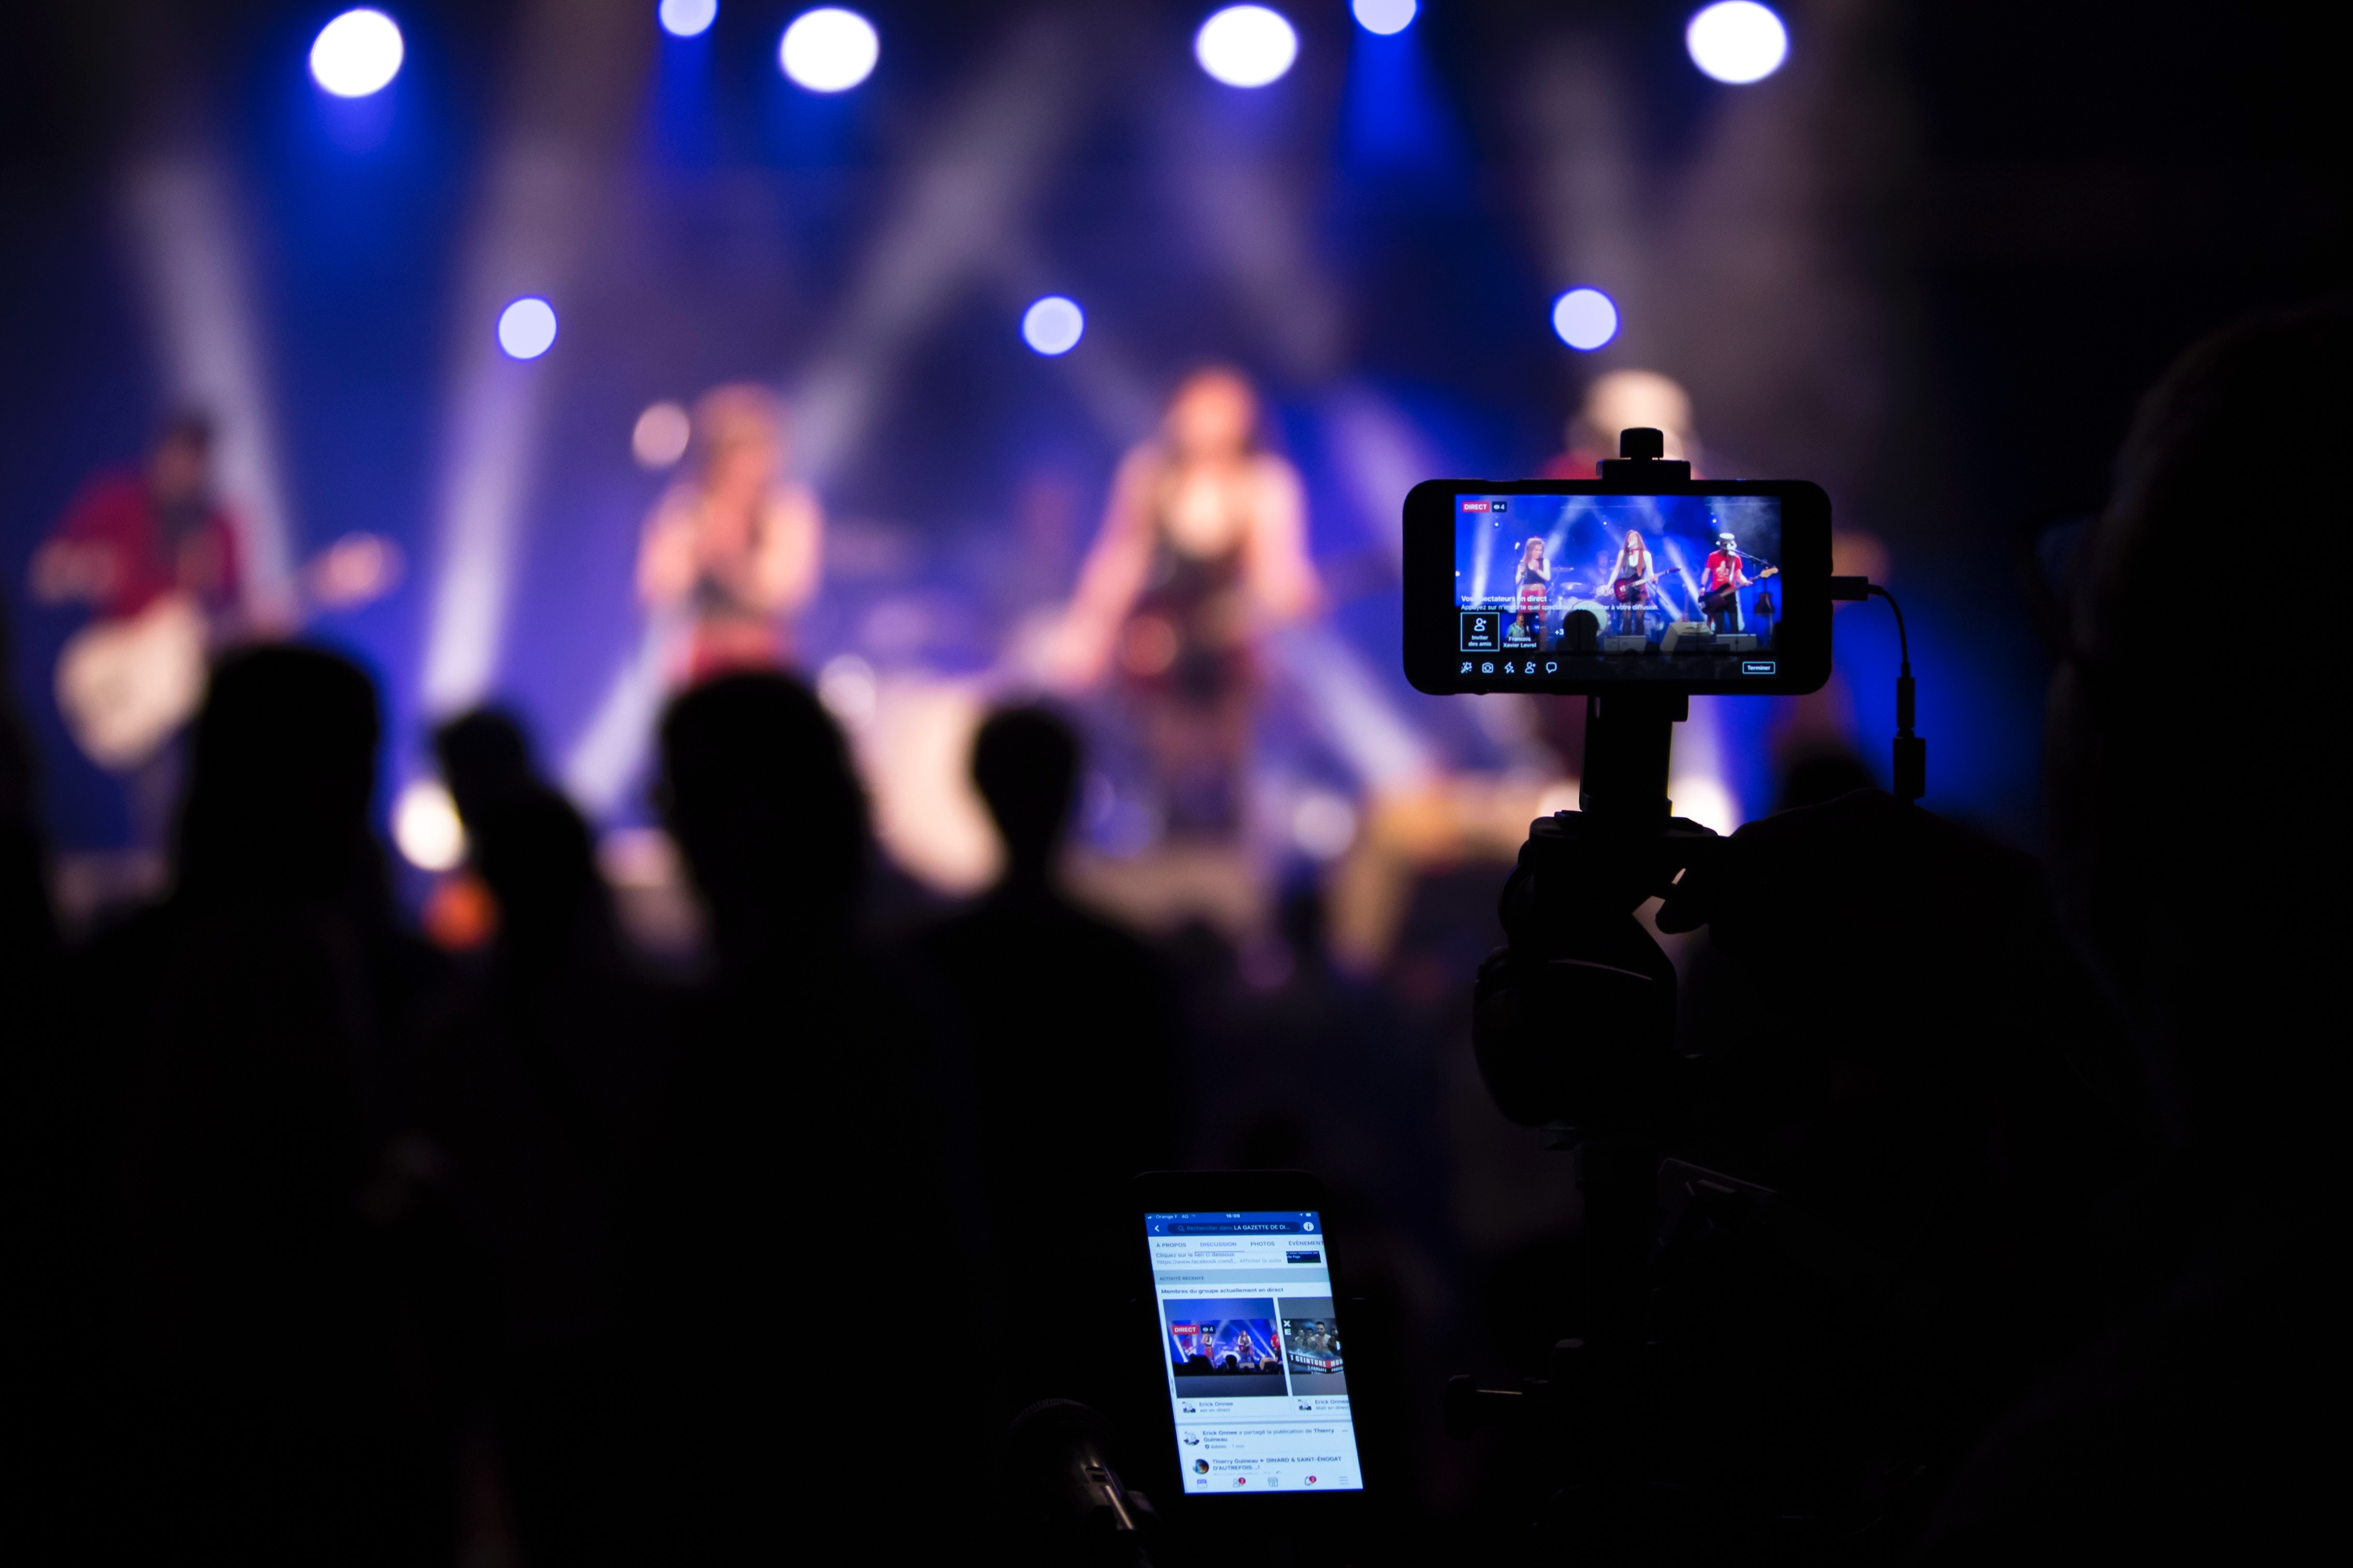 Live Streaming Shows: Opportunity for New Revenue Stream?